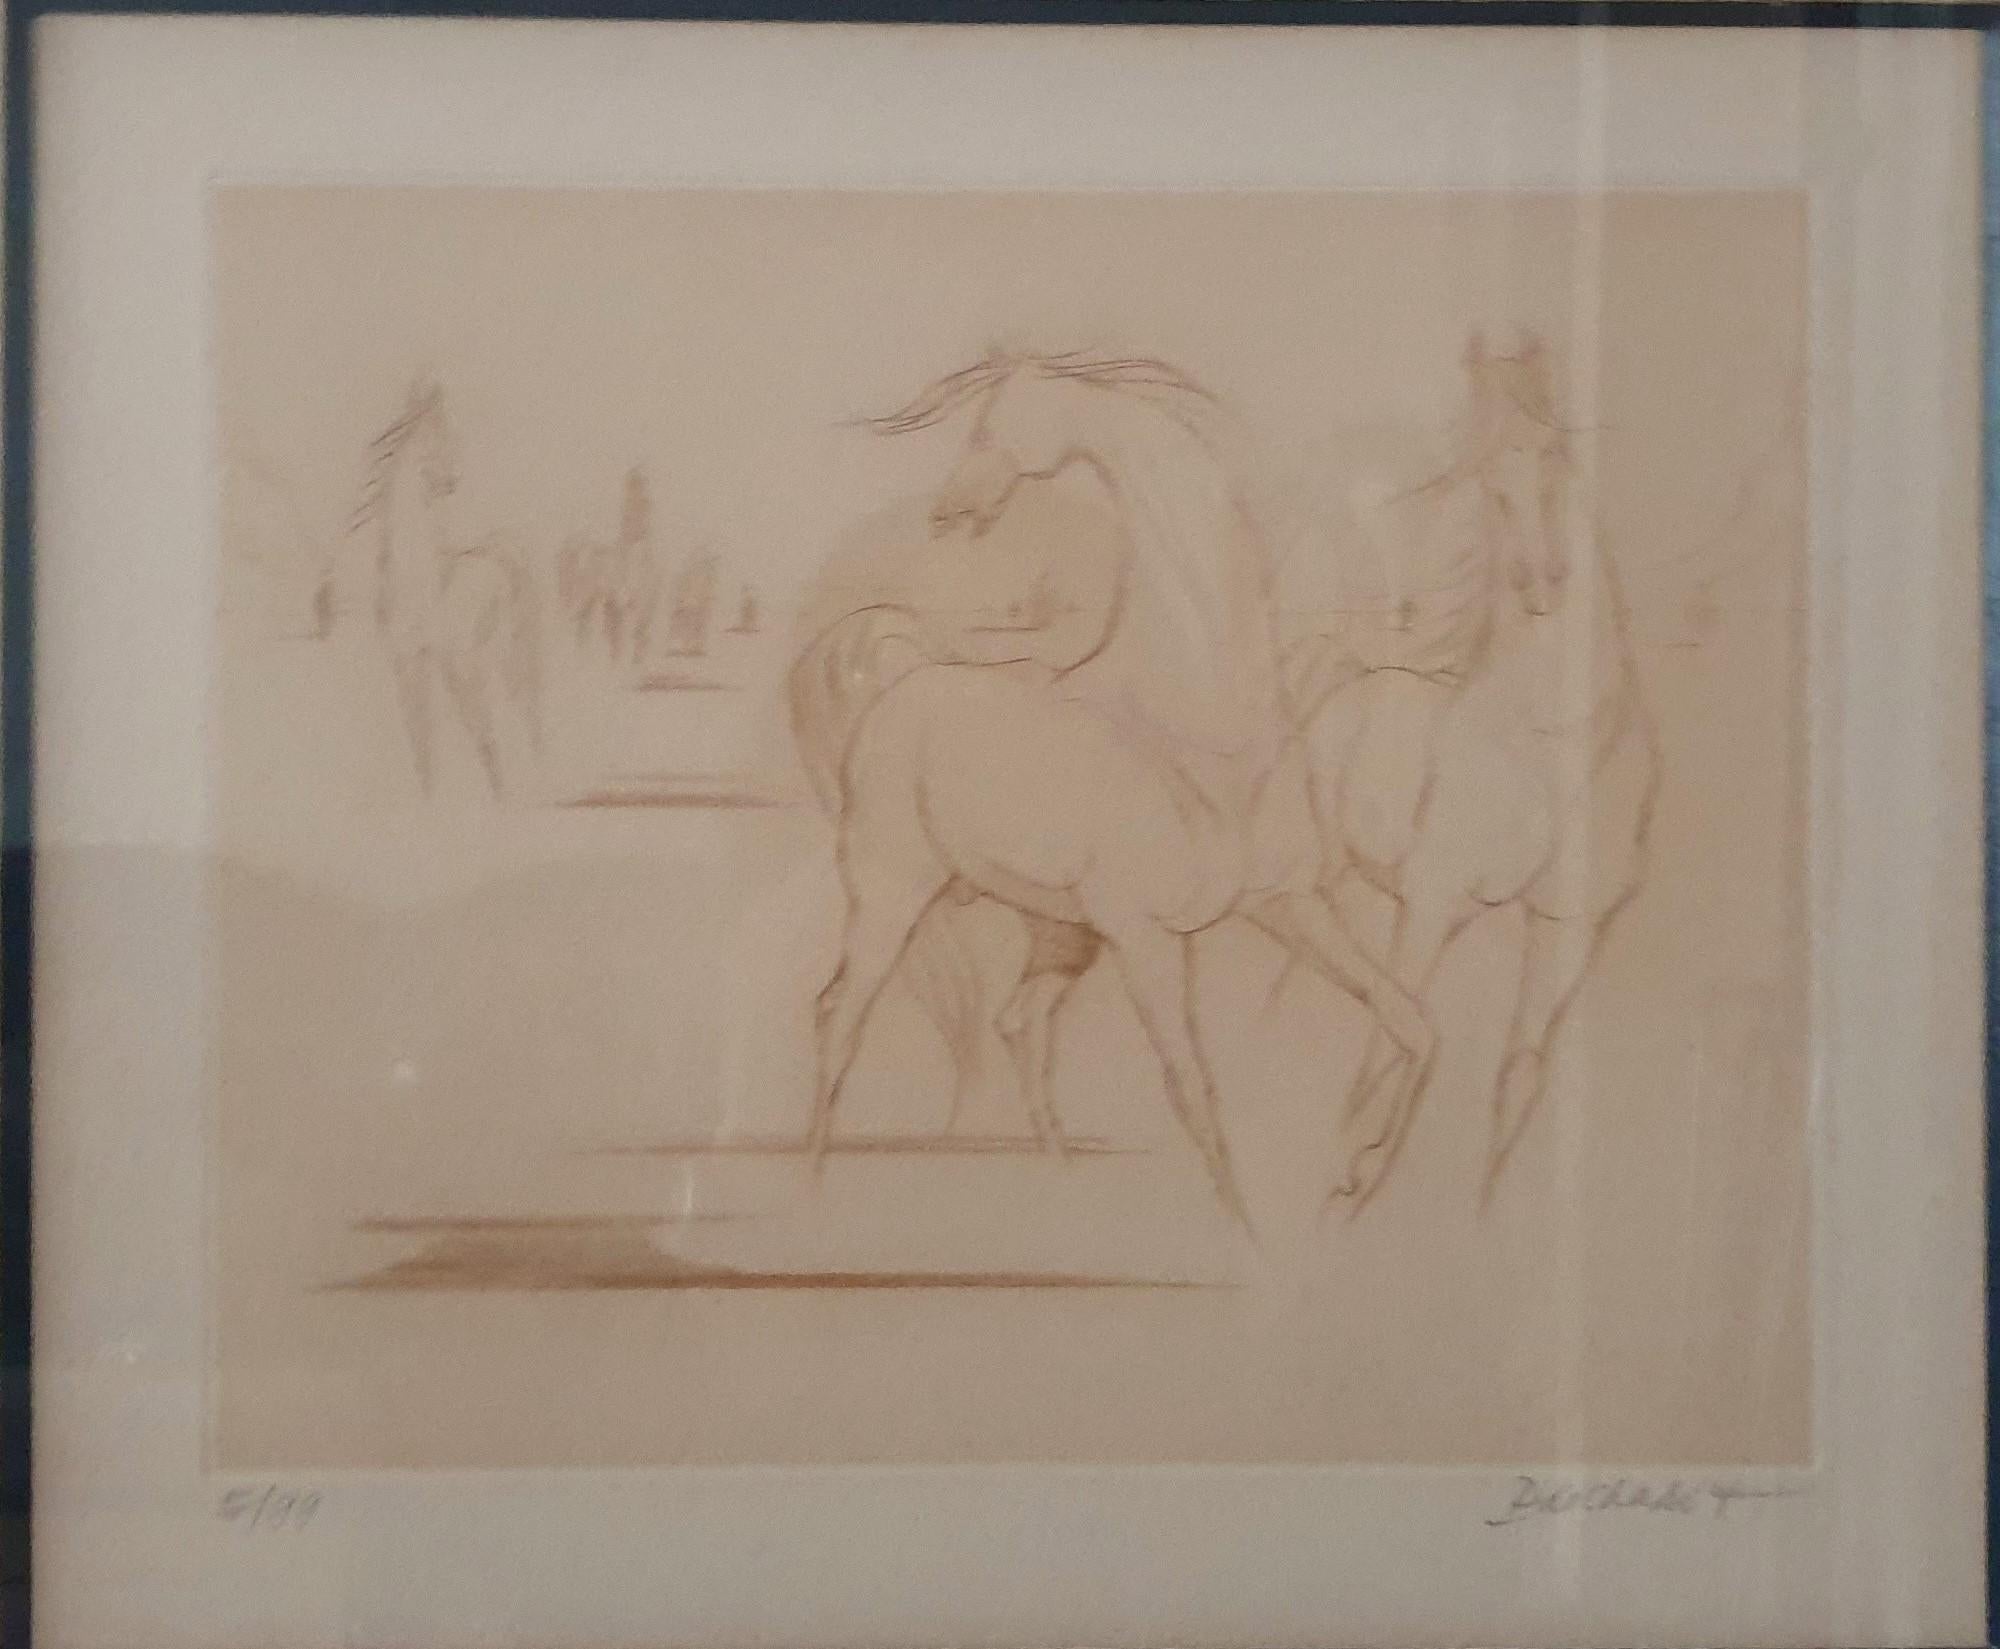 Post-Modern Etching with Acquatint, signed and numbered by Paul de Chabot.